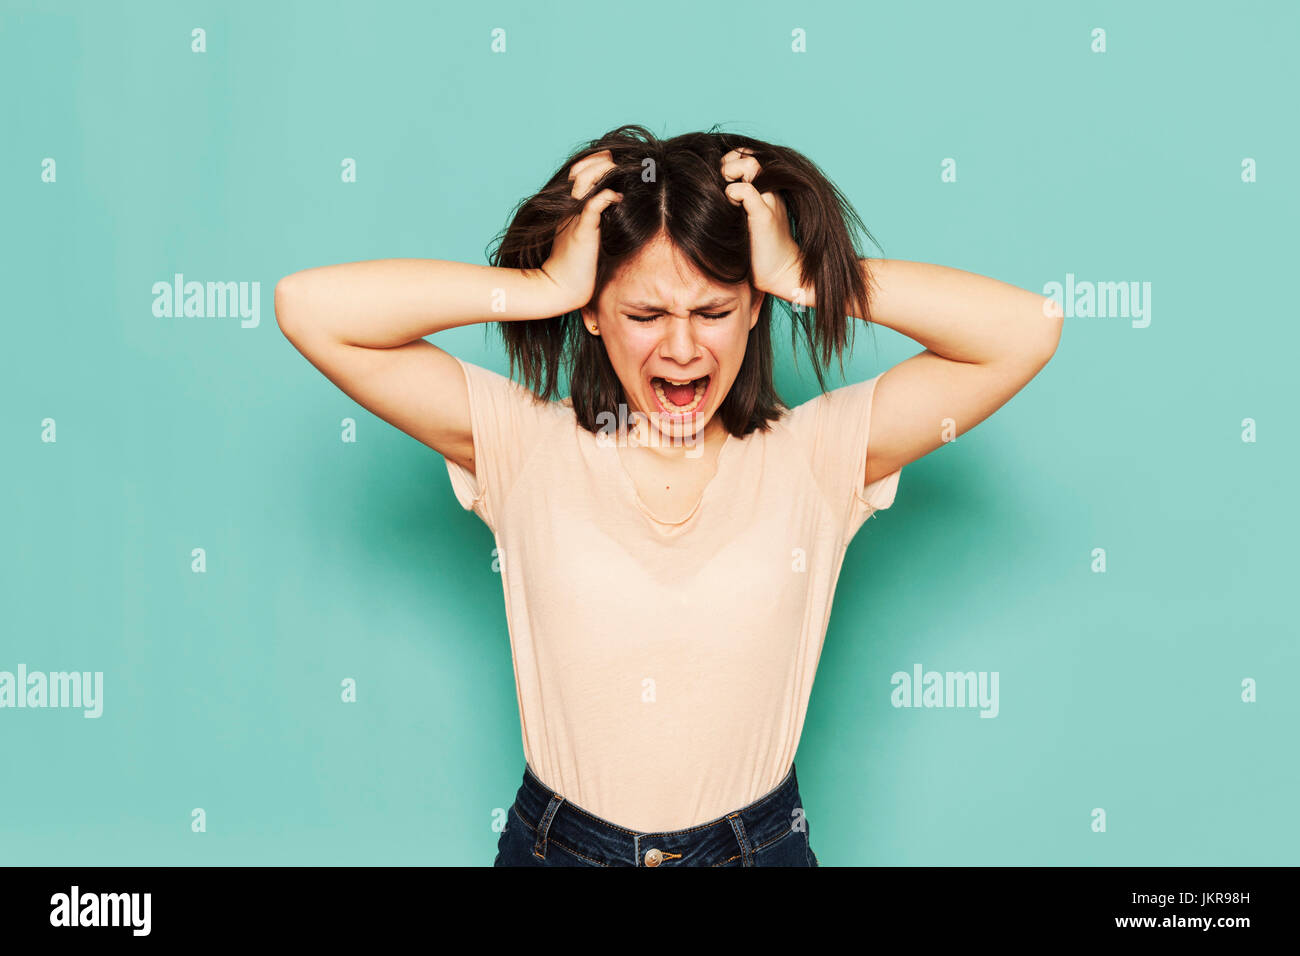 Irritated girl shouting with hands in hair against turquoise background Stock Photo